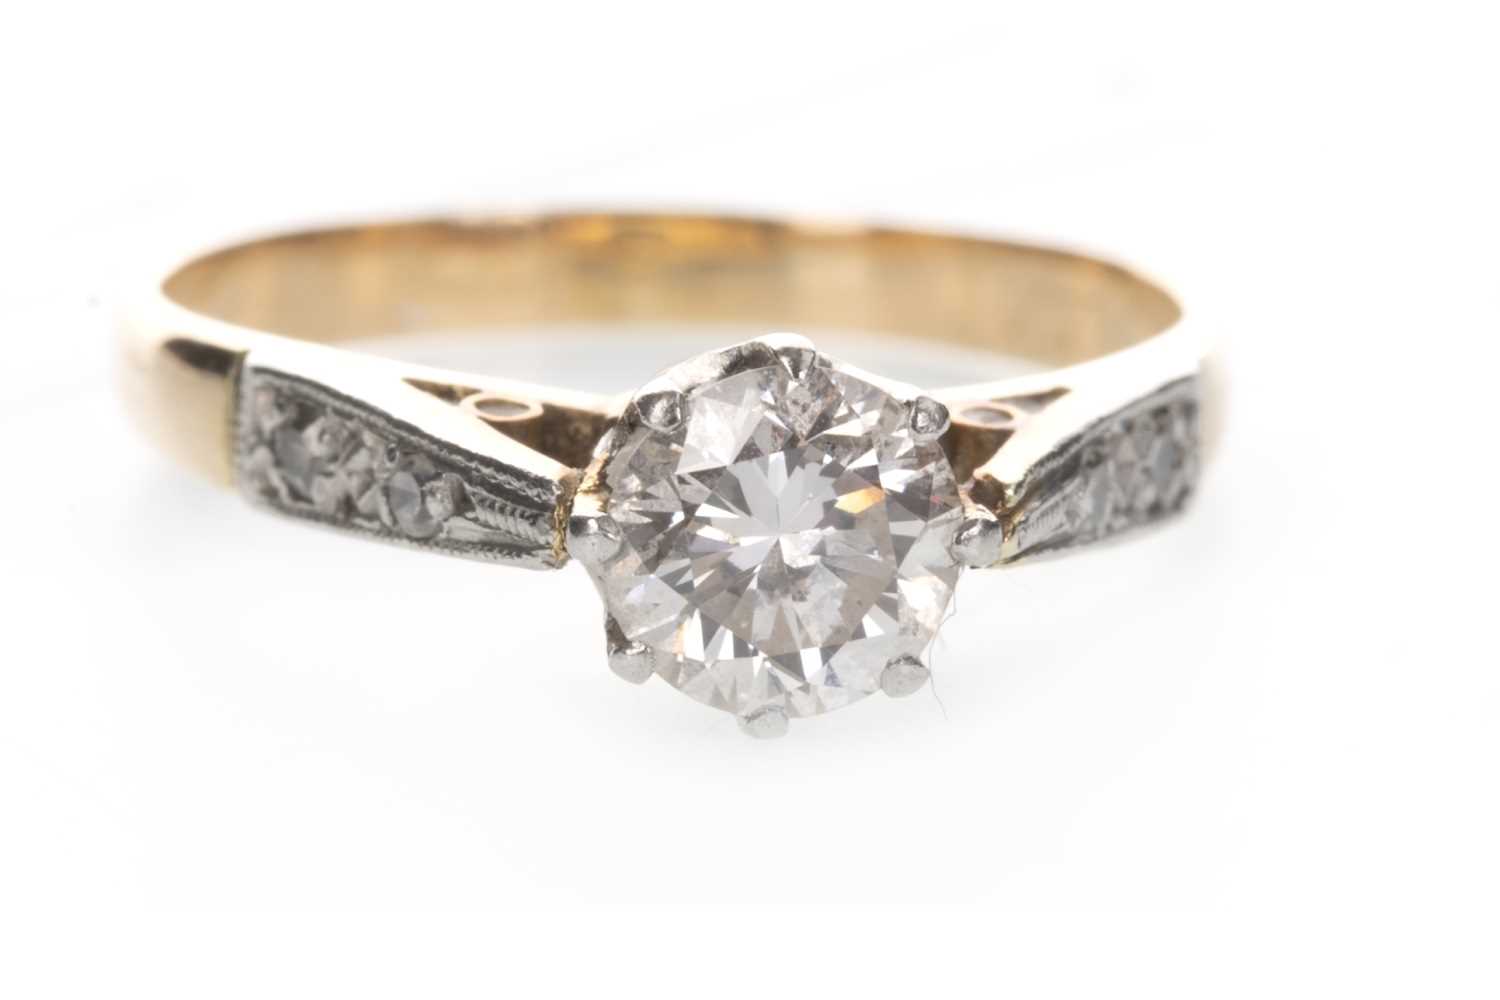 Lot 807 - A DIAMOND SOLITAIRE RING